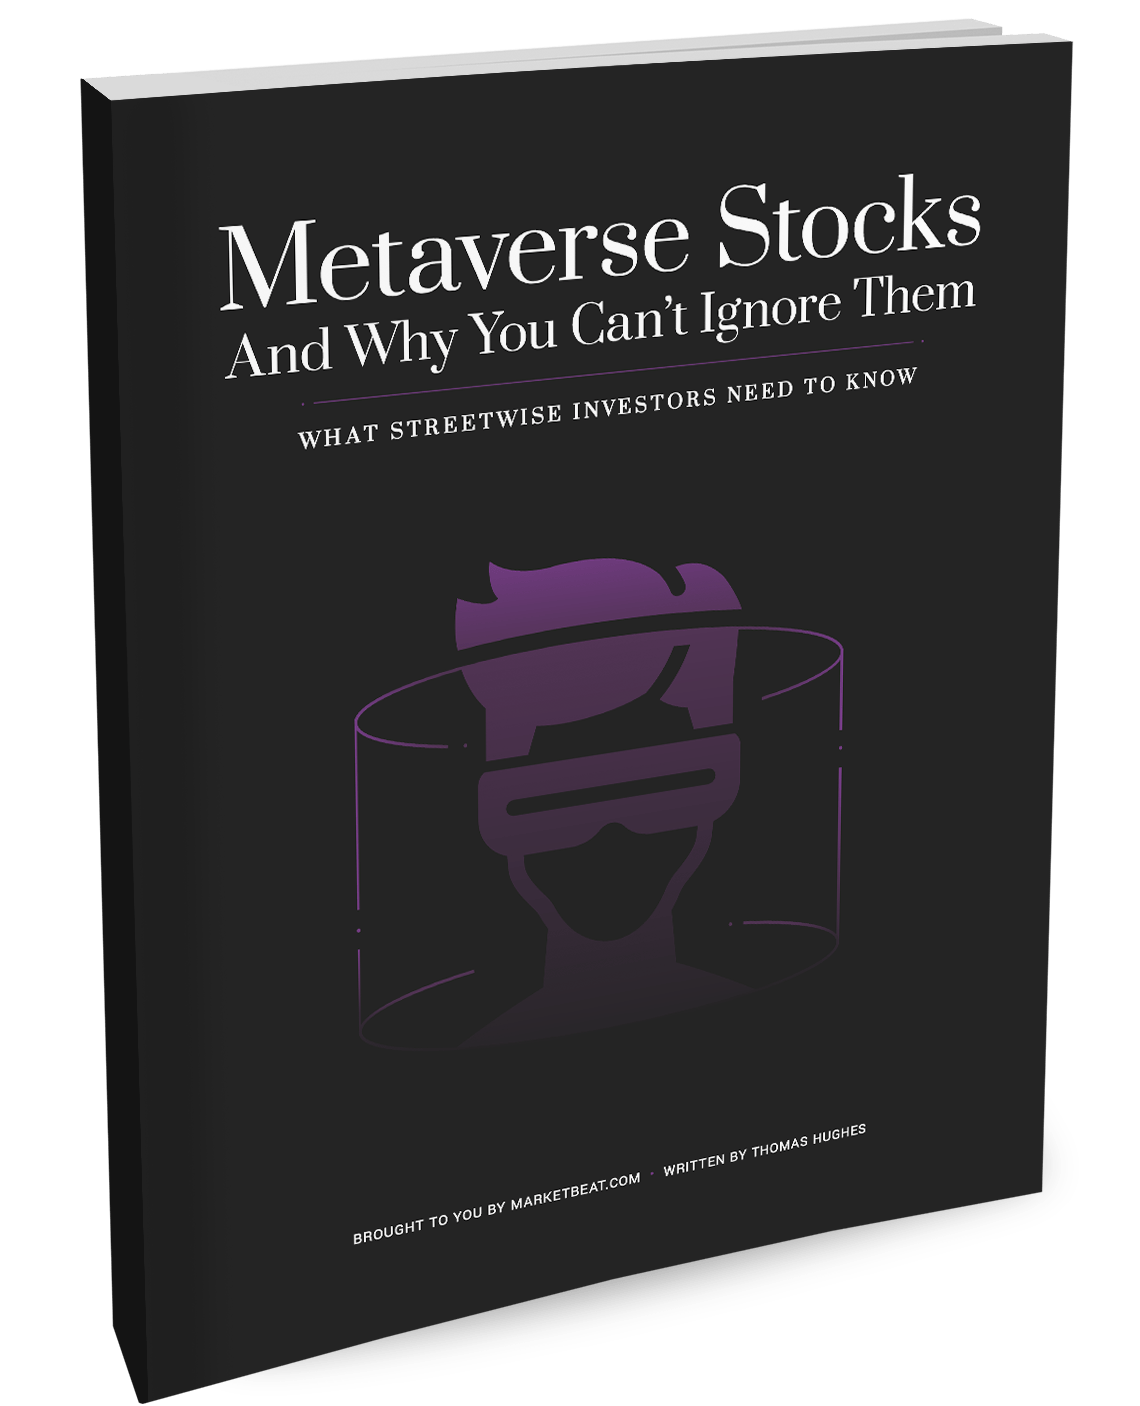 Metaverse Stock Coverage and Why You Can't Ignore Them